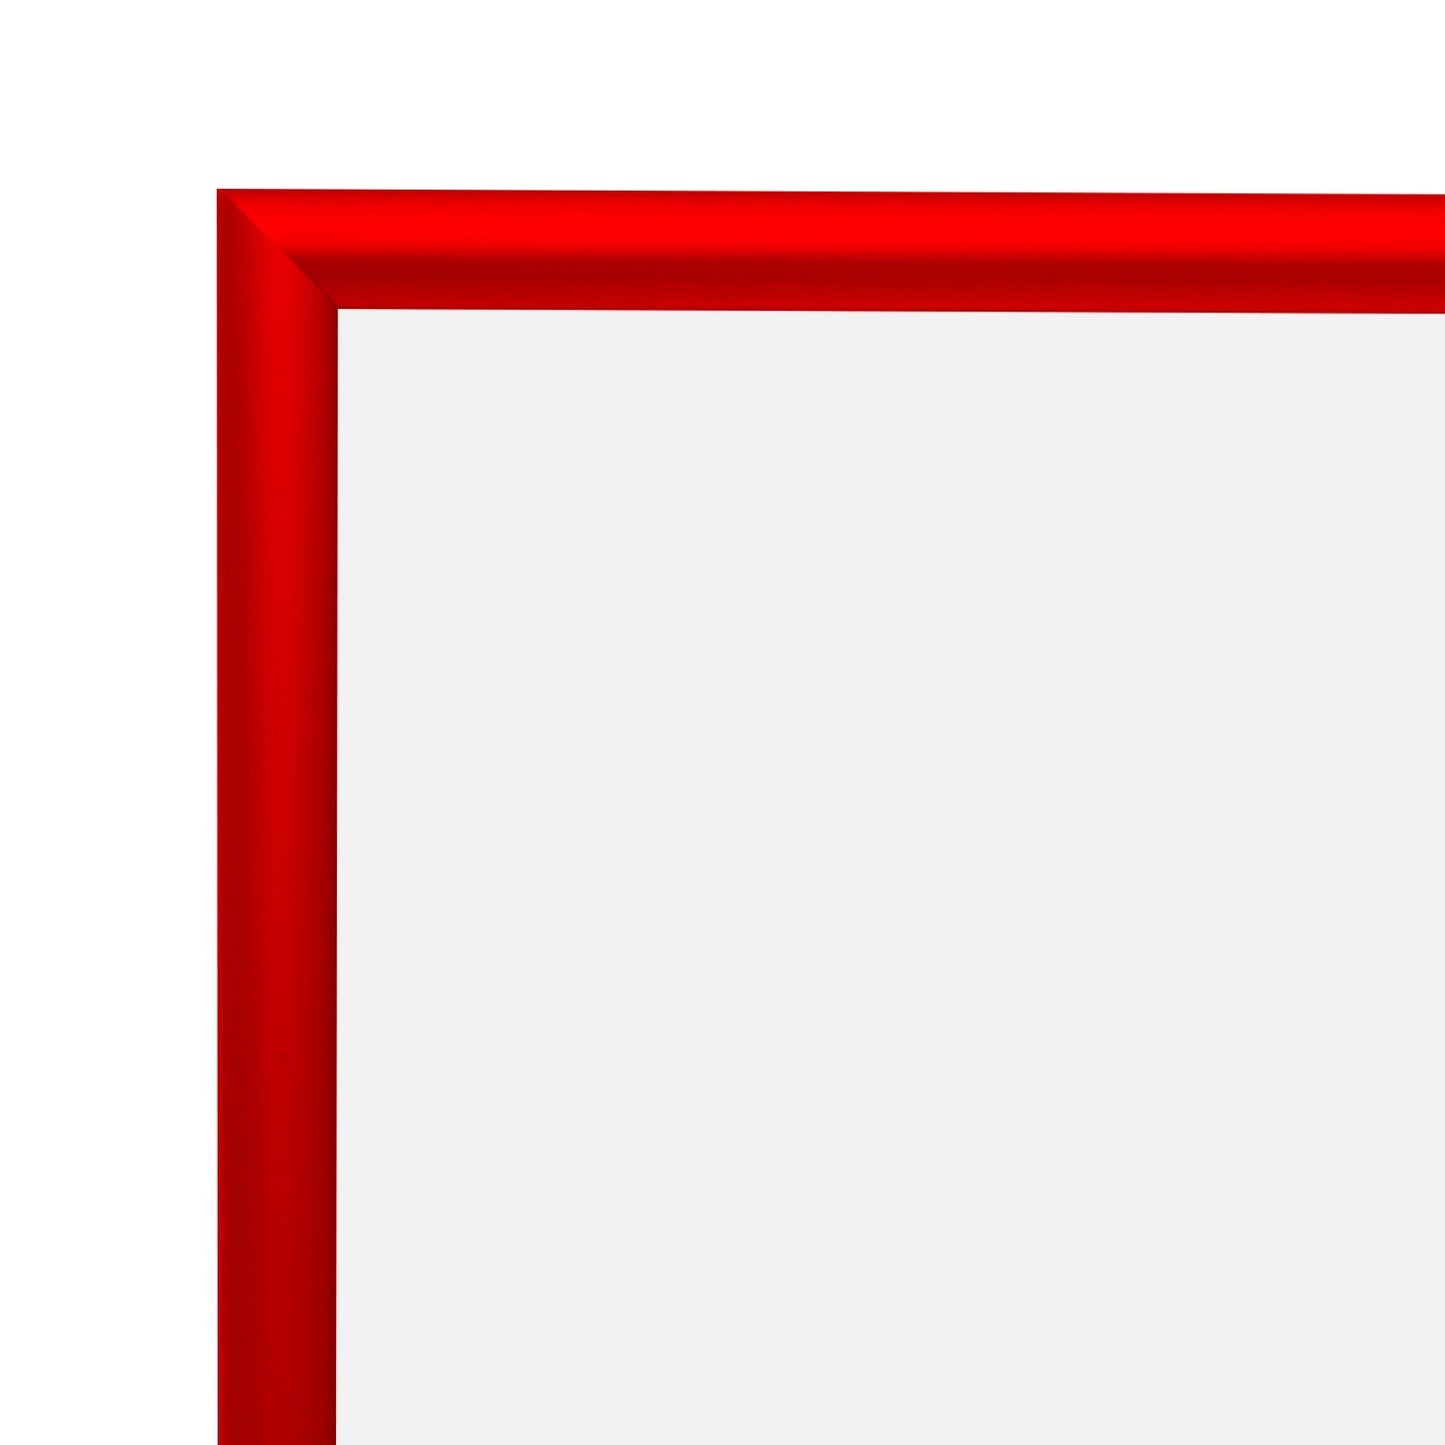 24x36 Red SnapeZo® Snap Frame - 1" Profile